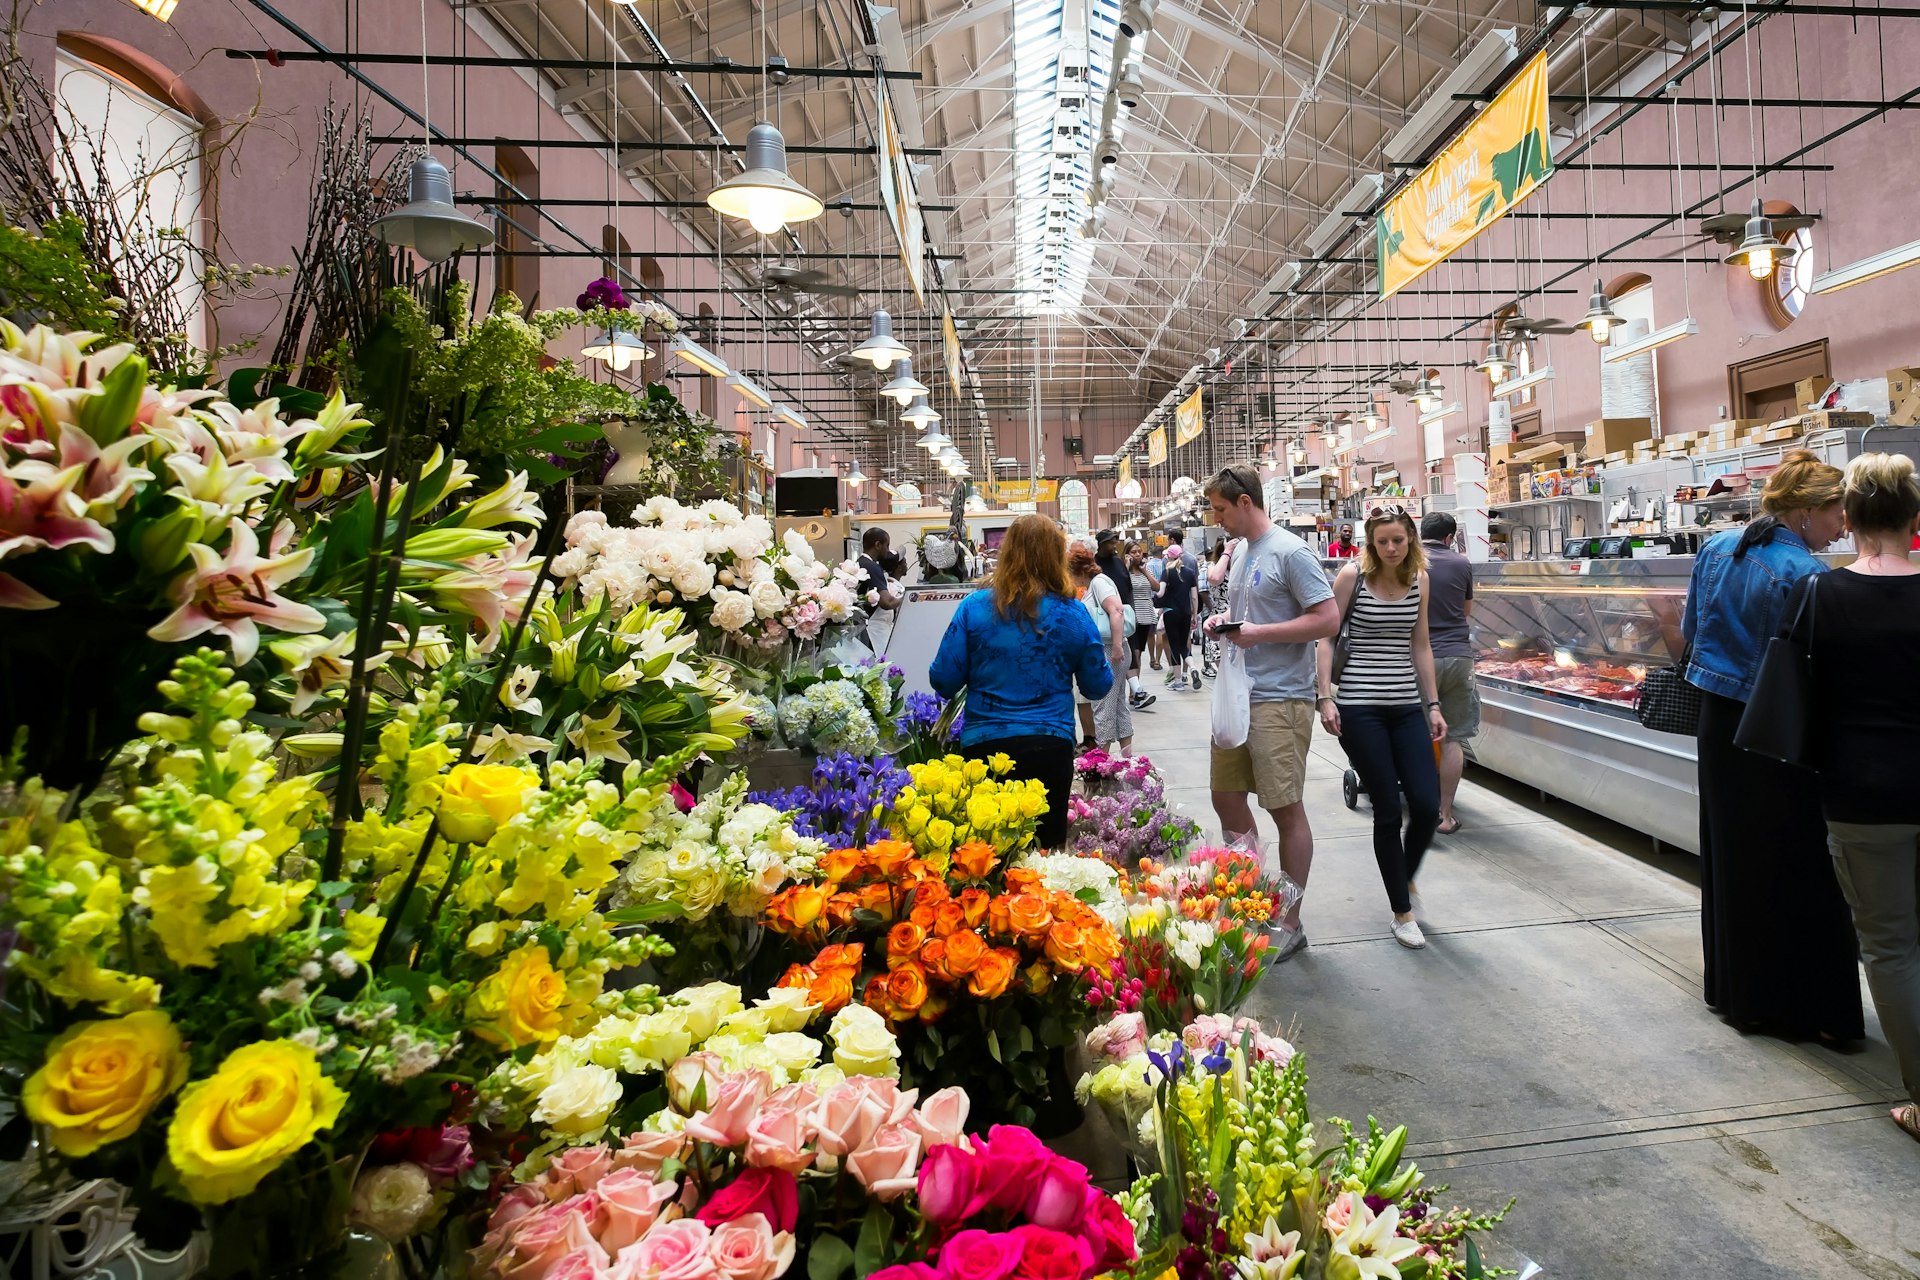 A market with fresh flowers on display on one side of the hall and meat counters on the other